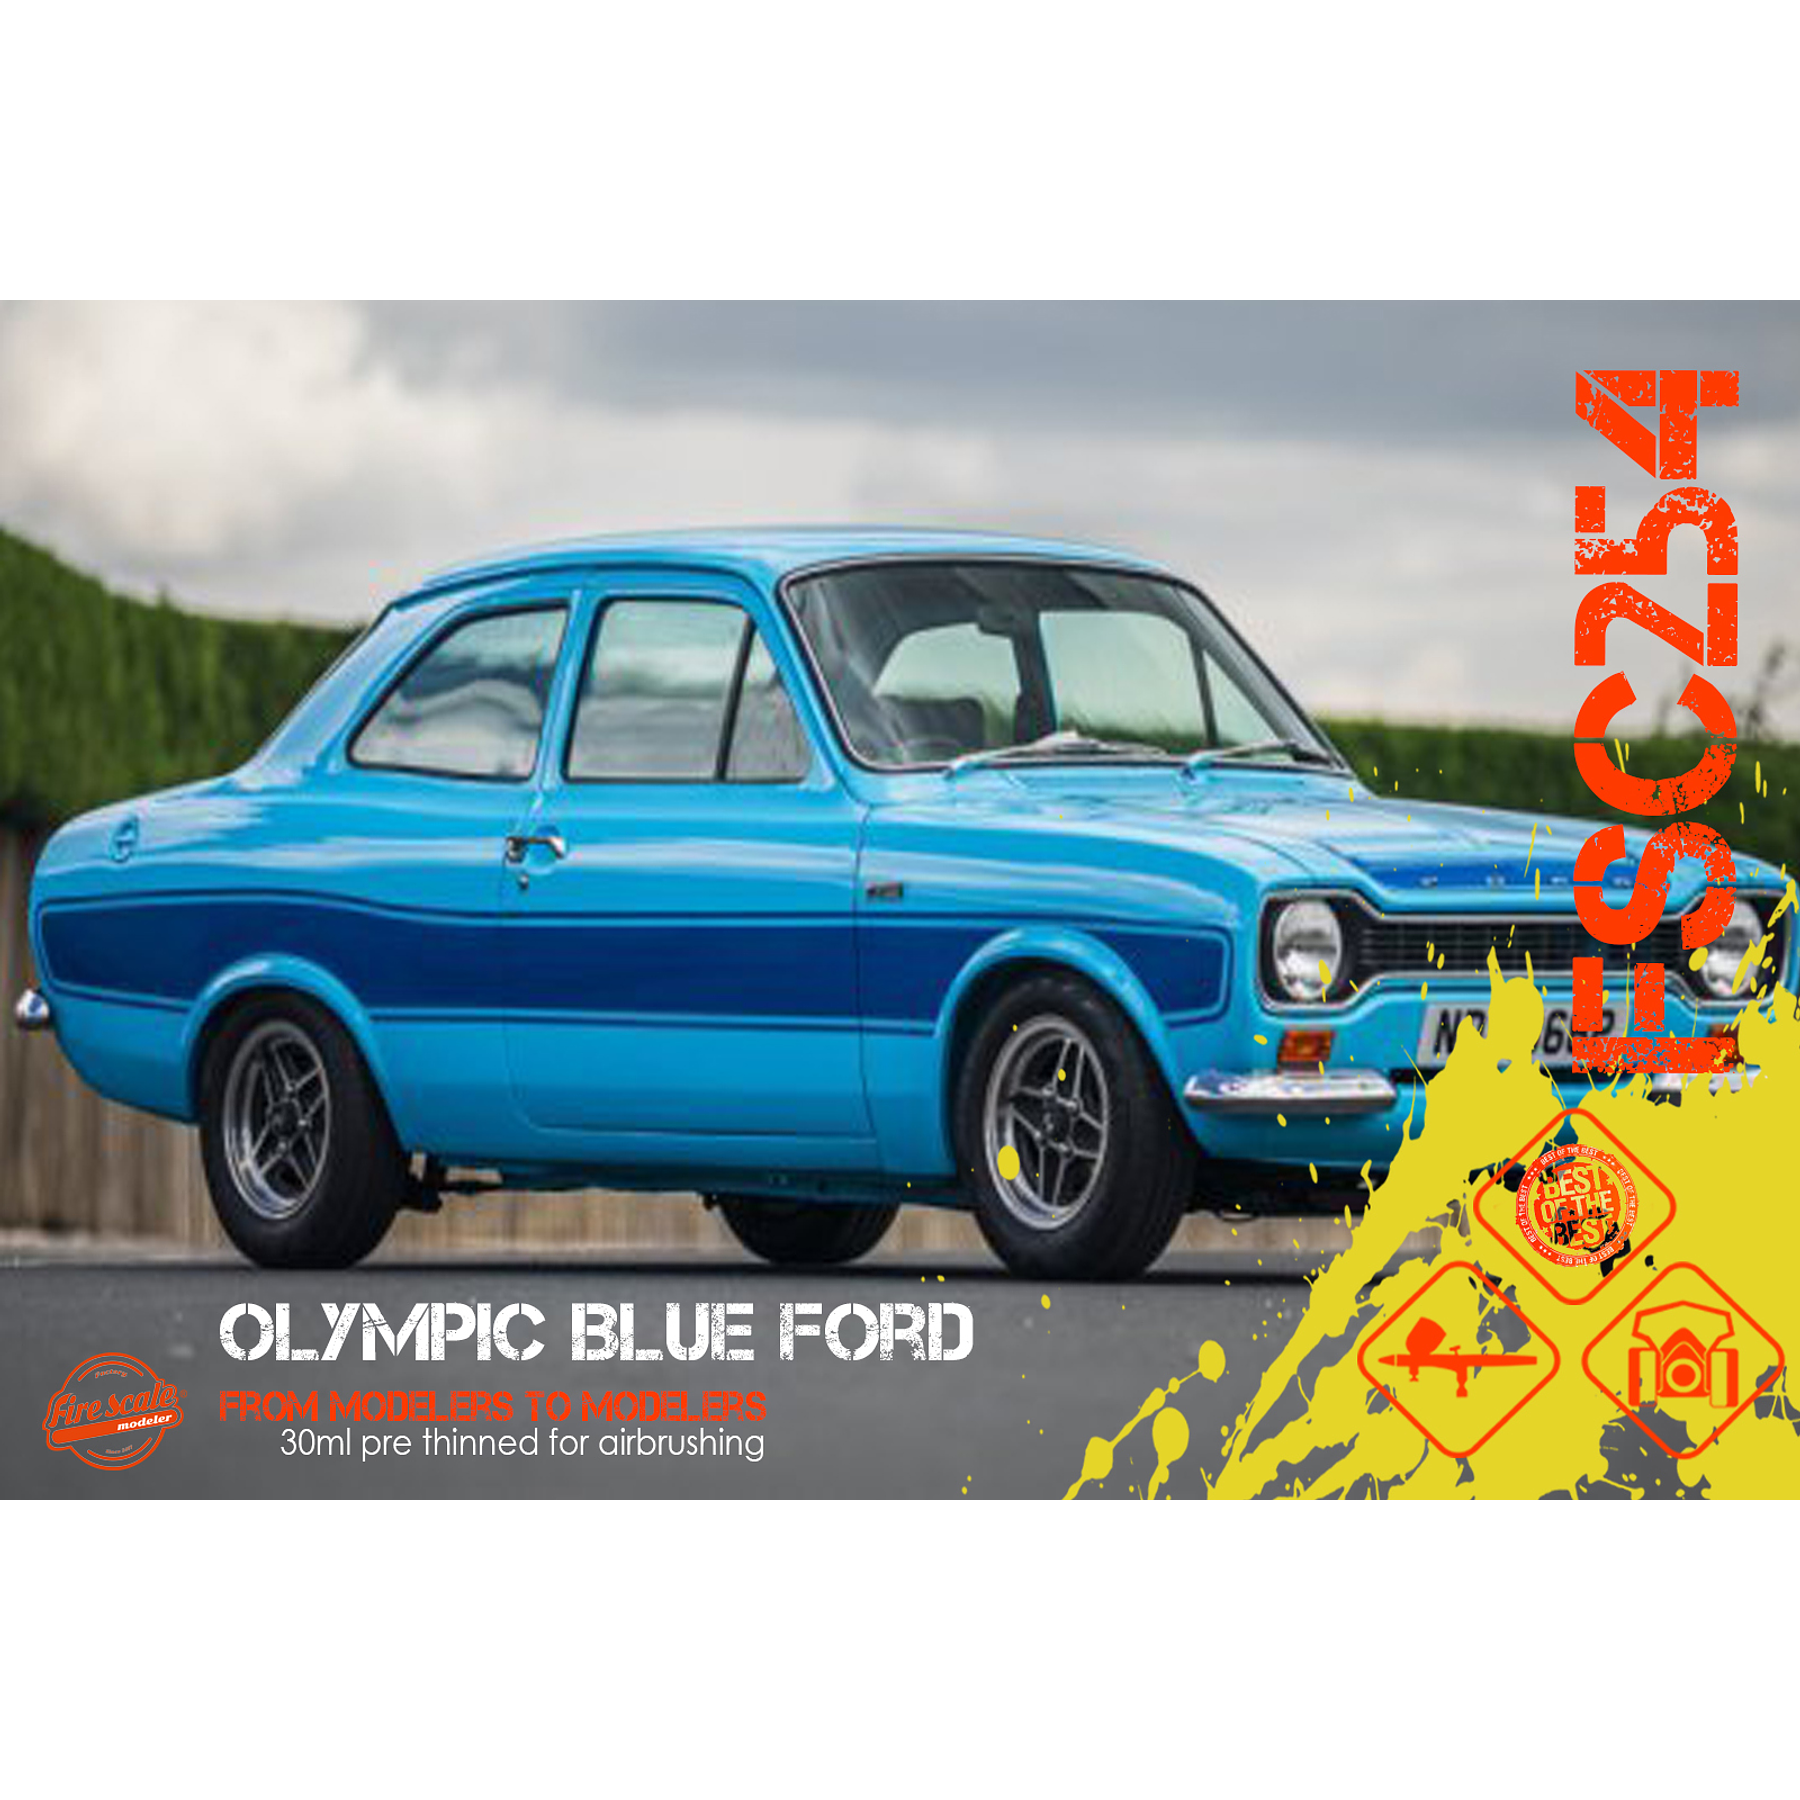 Olympic Blue Ford